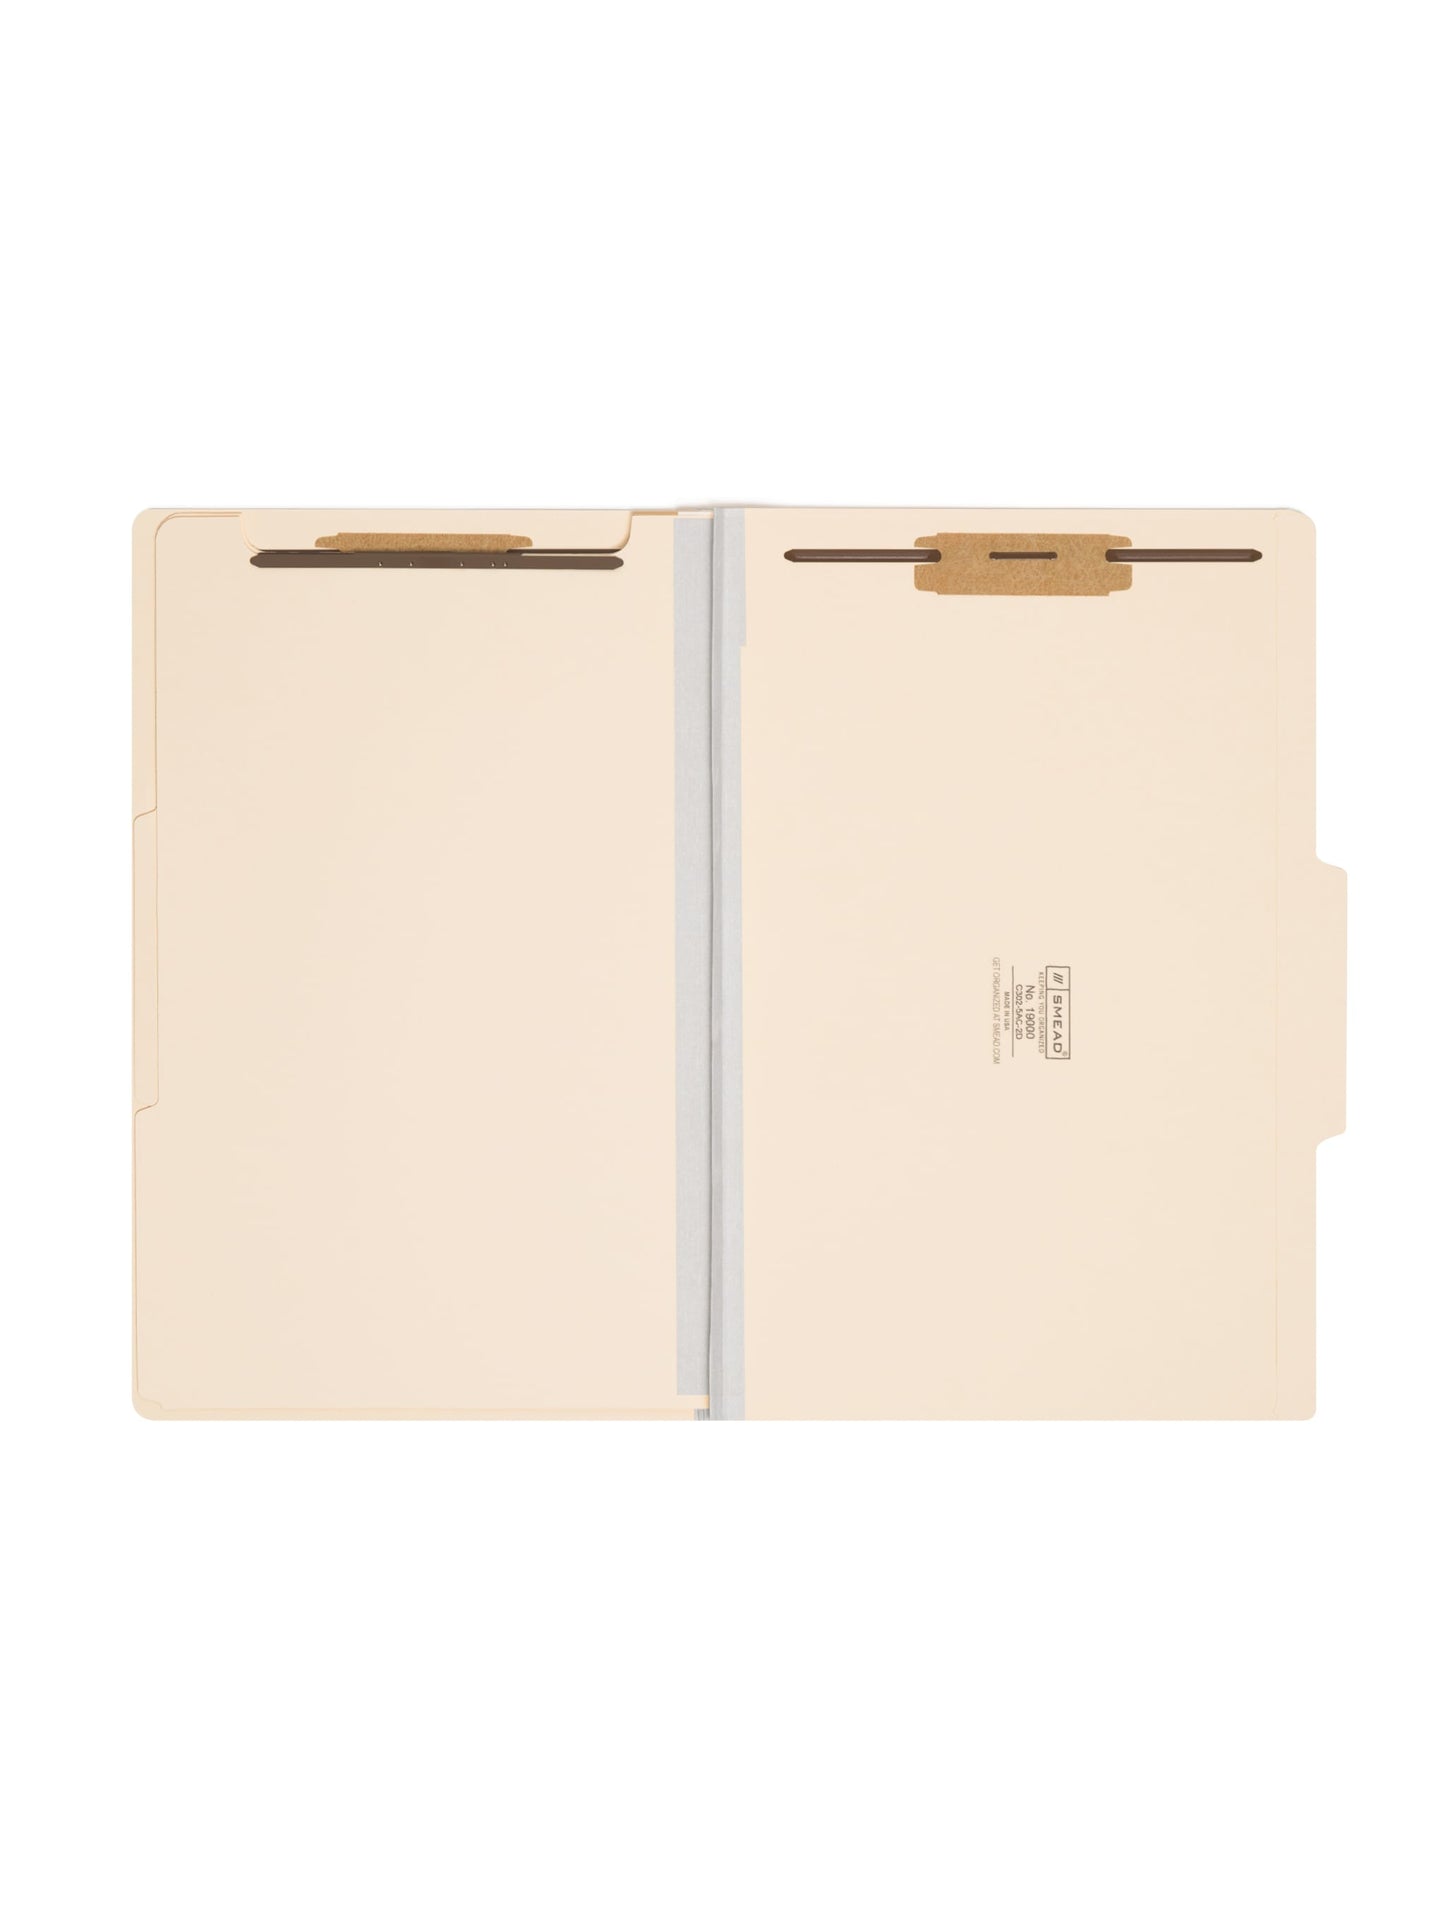 Classification File Folders, 2 Dividers, 2 inch Expansion, Manila Color, Legal Size, Set of 0, 30086486190009